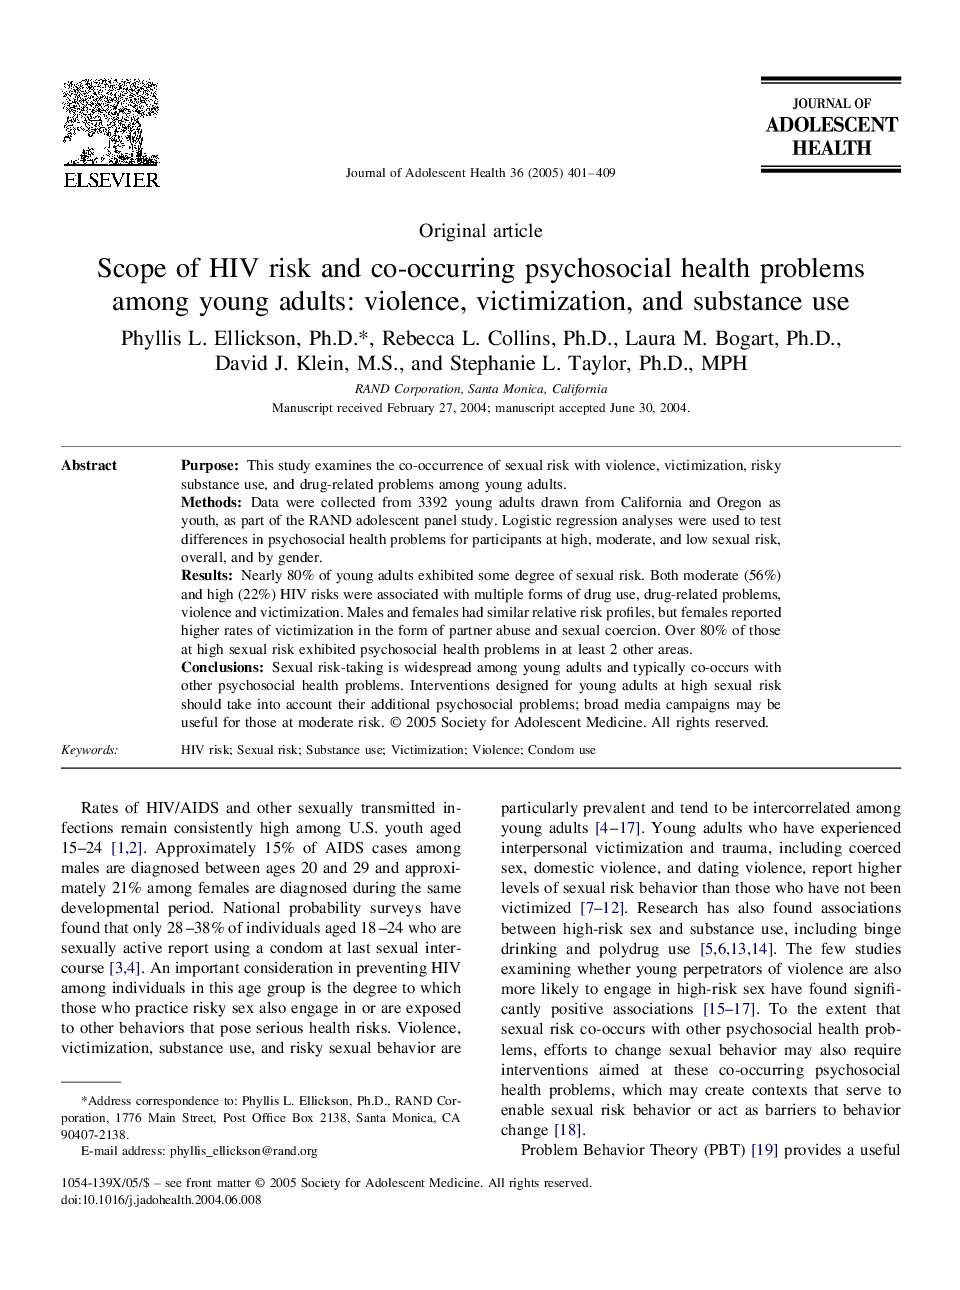 Scope of HIV risk and co-occurring psychosocial health problems among young adults: Violence, victimization, and substance use